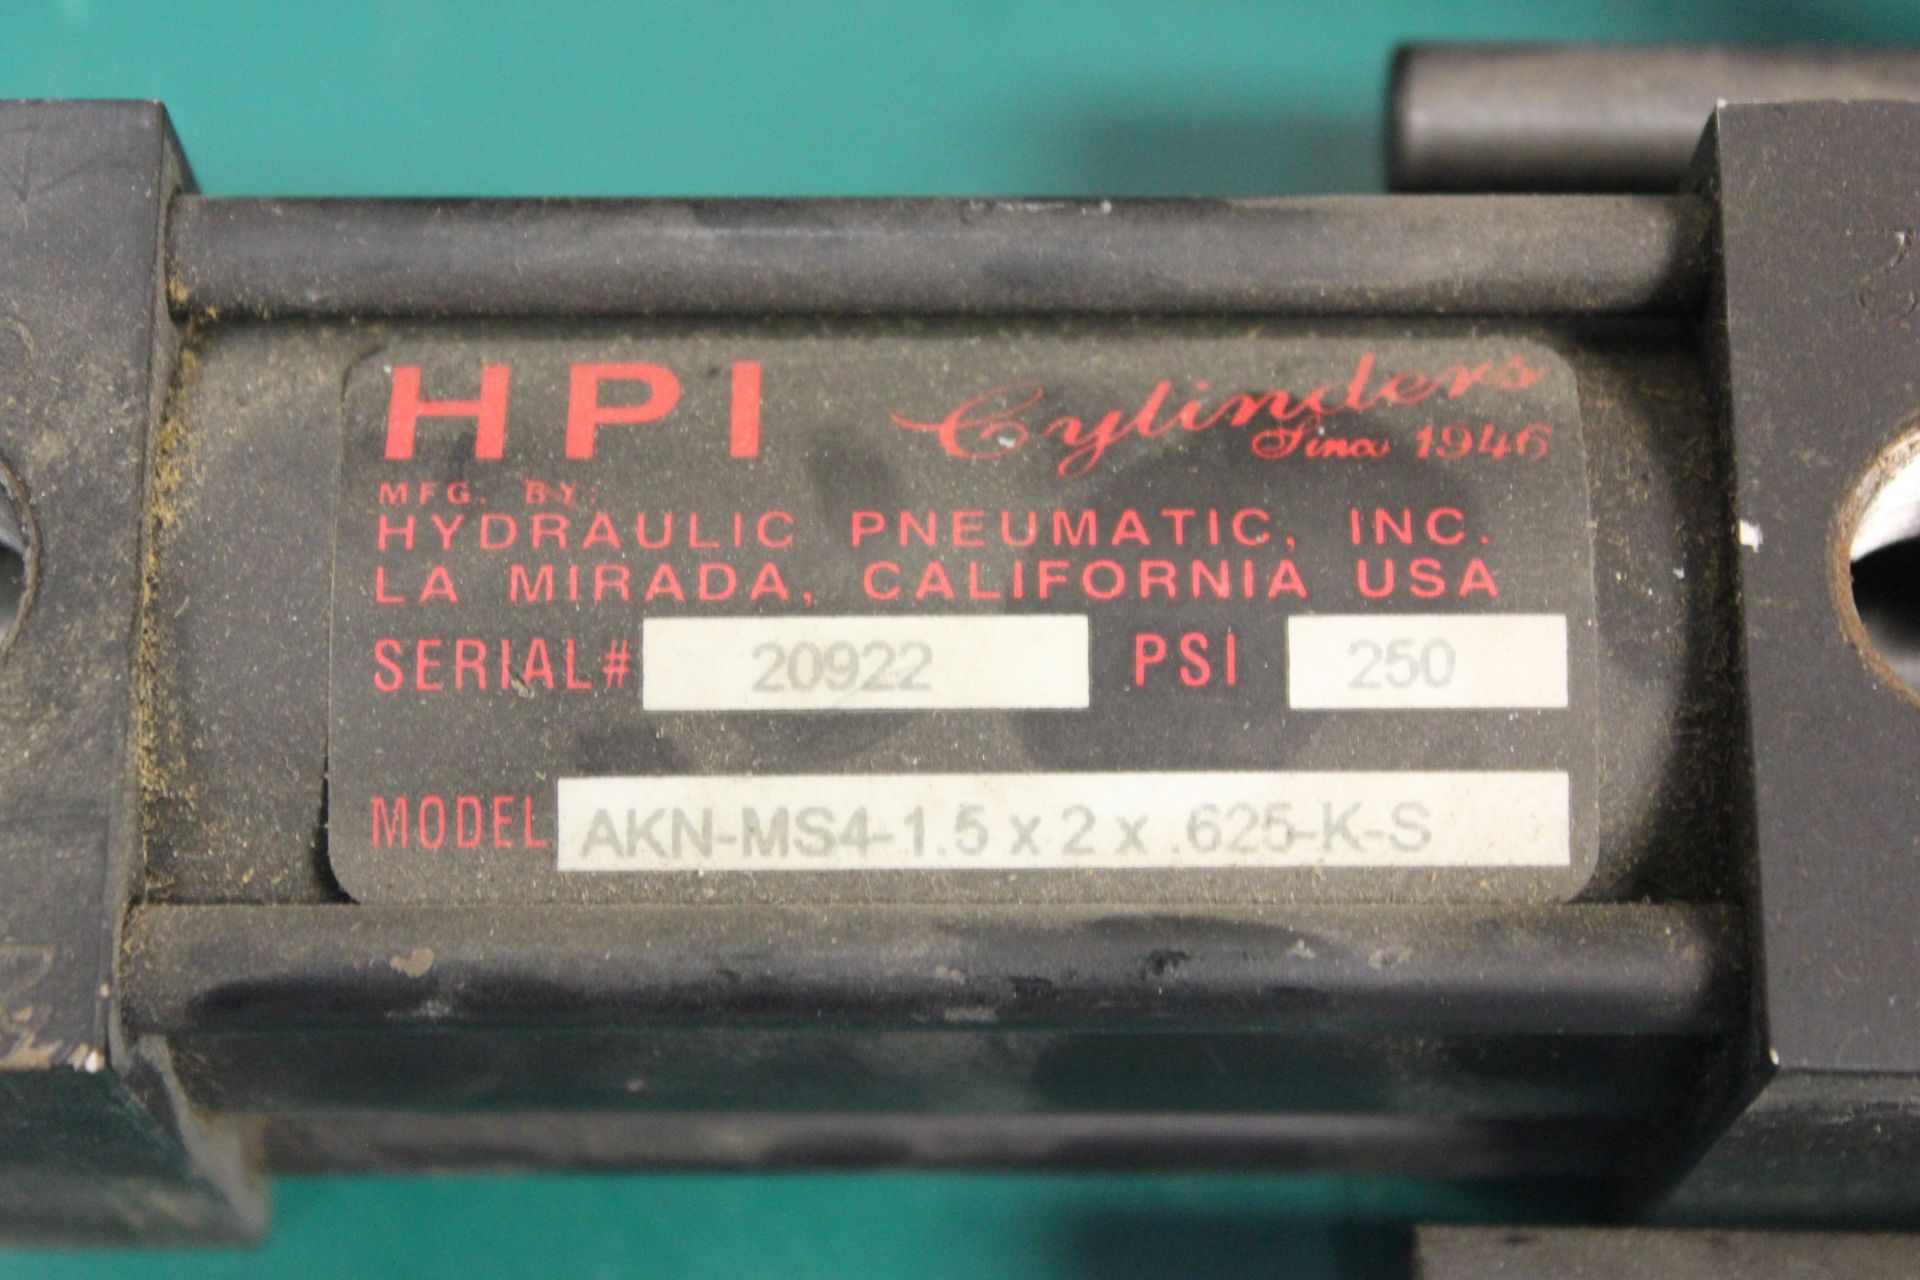 LOT OF 2 HPI HYDRAULIC PNEUMATIC CYLINDERS - Image 2 of 2